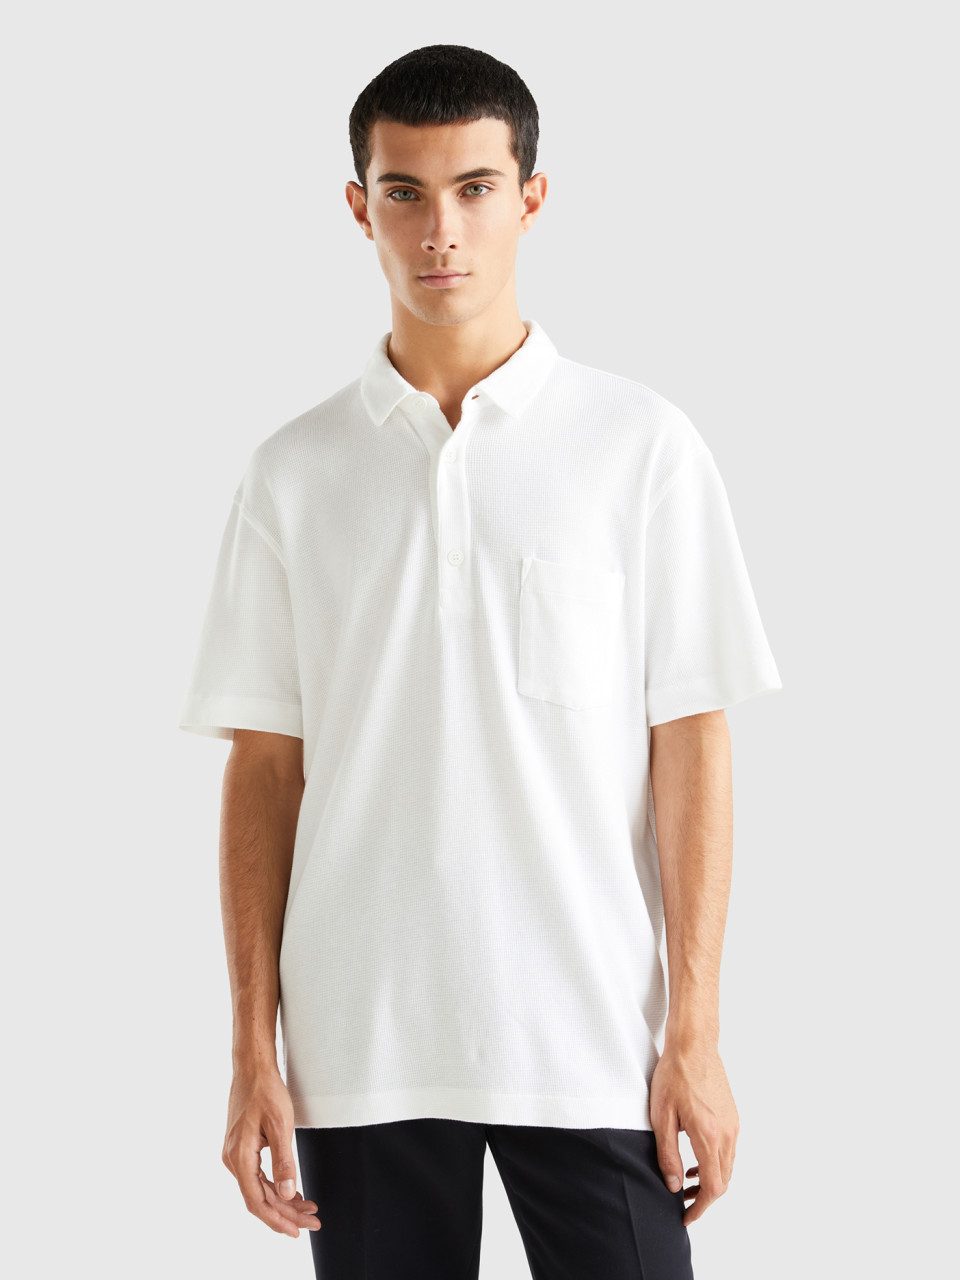 Benetton, Polo With Pocket And Relaxed Fit, Creamy White, Men